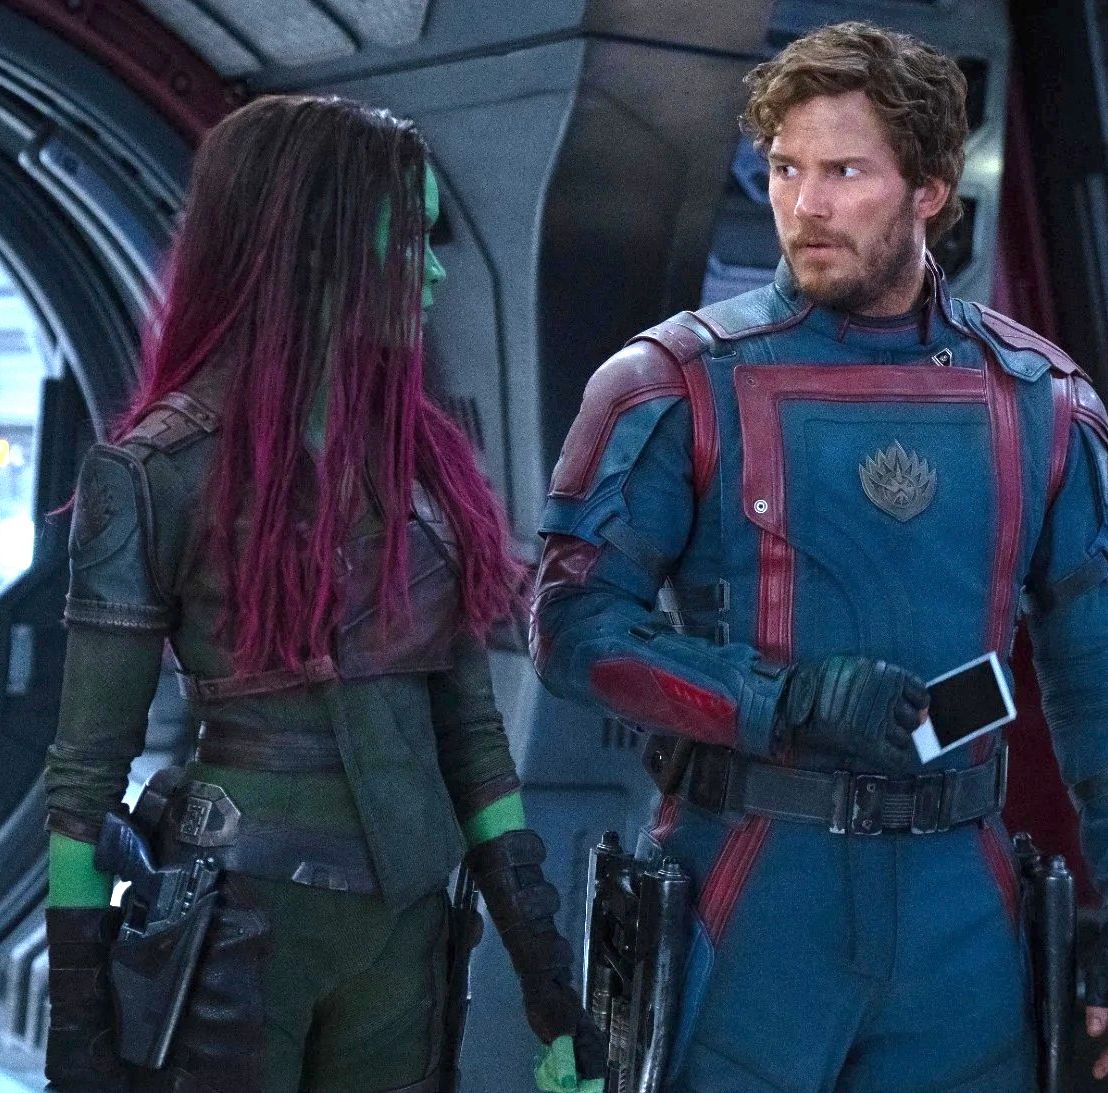 Guardians of the Galaxy Vol 3: What Can We Expect From the Third